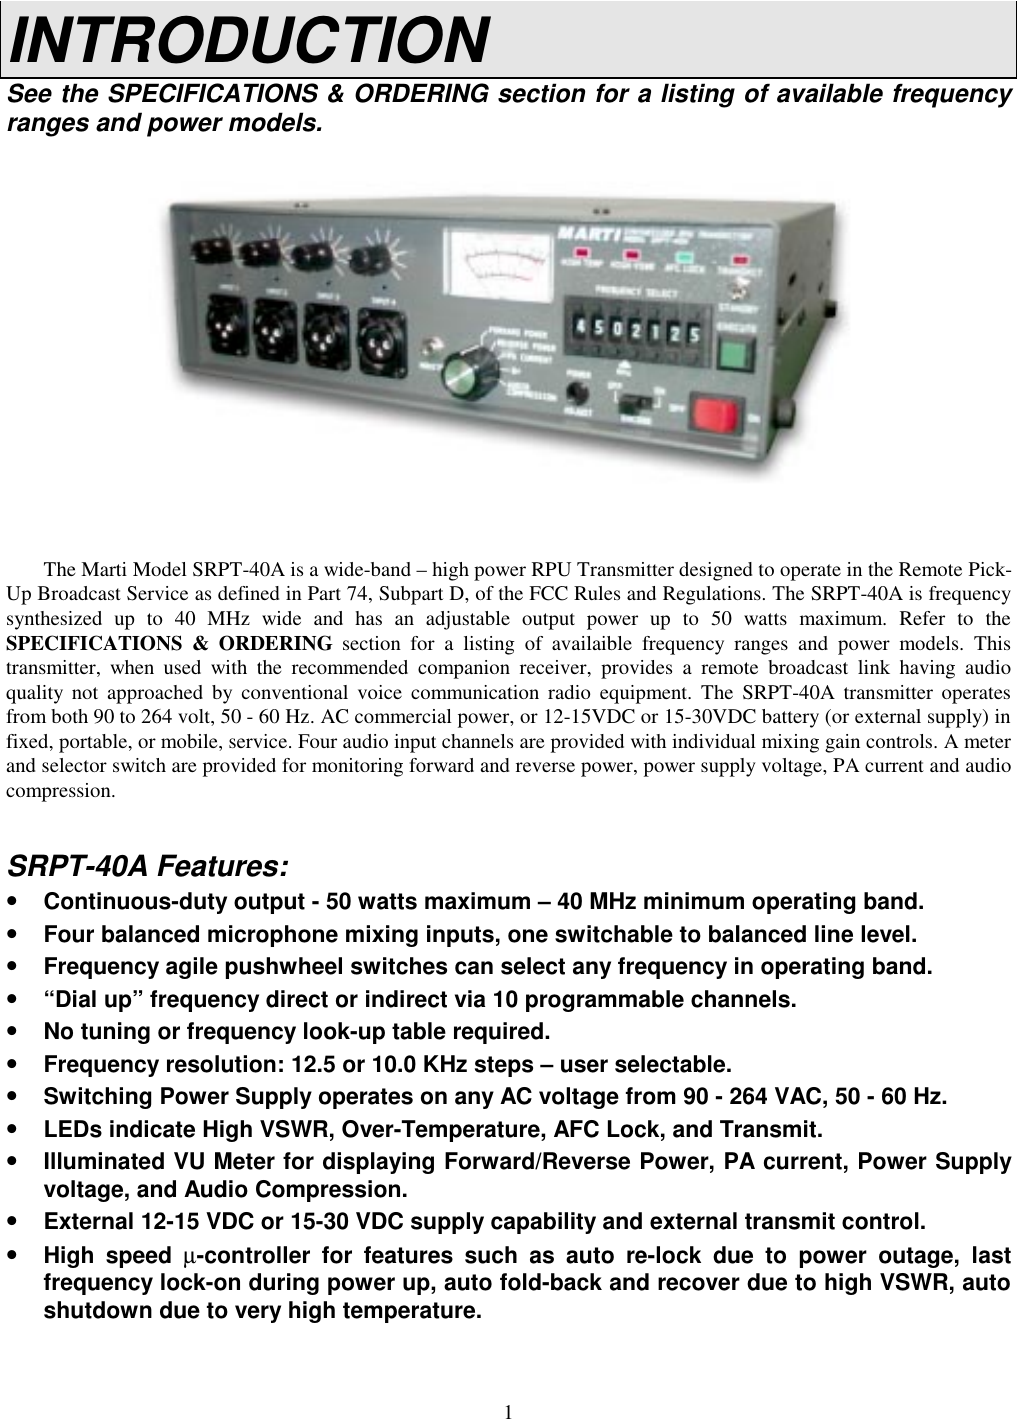 1INTRODUCTIONSee the SPECIFICATIONS &amp; ORDERING section for a listing of available frequencyranges and power models.The Marti Model SRPT-40A is a wide-band – high power RPU Transmitter designed to operate in the Remote Pick-Up Broadcast Service as defined in Part 74, Subpart D, of the FCC Rules and Regulations. The SRPT-40A is frequencysynthesized up to 40 MHz wide and has an adjustable output power up to 50 watts maximum. Refer to theSPECIFICATIONS &amp; ORDERING section for a listing of availaible frequency ranges and power models. Thistransmitter, when used with the recommended companion receiver, provides a remote broadcast link having audioquality not approached by conventional voice communication radio equipment. The SRPT-40A transmitter operatesfrom both 90 to 264 volt, 50 - 60 Hz. AC commercial power, or 12-15VDC or 15-30VDC battery (or external supply) infixed, portable, or mobile, service. Four audio input channels are provided with individual mixing gain controls. A meterand selector switch are provided for monitoring forward and reverse power, power supply voltage, PA current and audiocompression.SRPT-40A Features:•Continuous-duty output - 50 watts maximum – 40 MHz minimum operating band.•Four balanced microphone mixing inputs, one switchable to balanced line level.•Frequency agile pushwheel switches can select any frequency in operating band.•“Dial up” frequency direct or indirect via 10 programmable channels.•No tuning or frequency look-up table required.•Frequency resolution: 12.5 or 10.0 KHz steps – user selectable.•Switching Power Supply operates on any AC voltage from 90 - 264 VAC, 50 - 60 Hz.•LEDs indicate High VSWR, Over-Temperature, AFC Lock, and Transmit.•Illuminated VU Meter for displaying Forward/Reverse Power, PA current, Power Supplyvoltage, and Audio Compression.•External 12-15 VDC or 15-30 VDC supply capability and external transmit control.•High speed µ-controller for features such as auto re-lock due to power outage, lastfrequency lock-on during power up, auto fold-back and recover due to high VSWR, autoshutdown due to very high temperature.